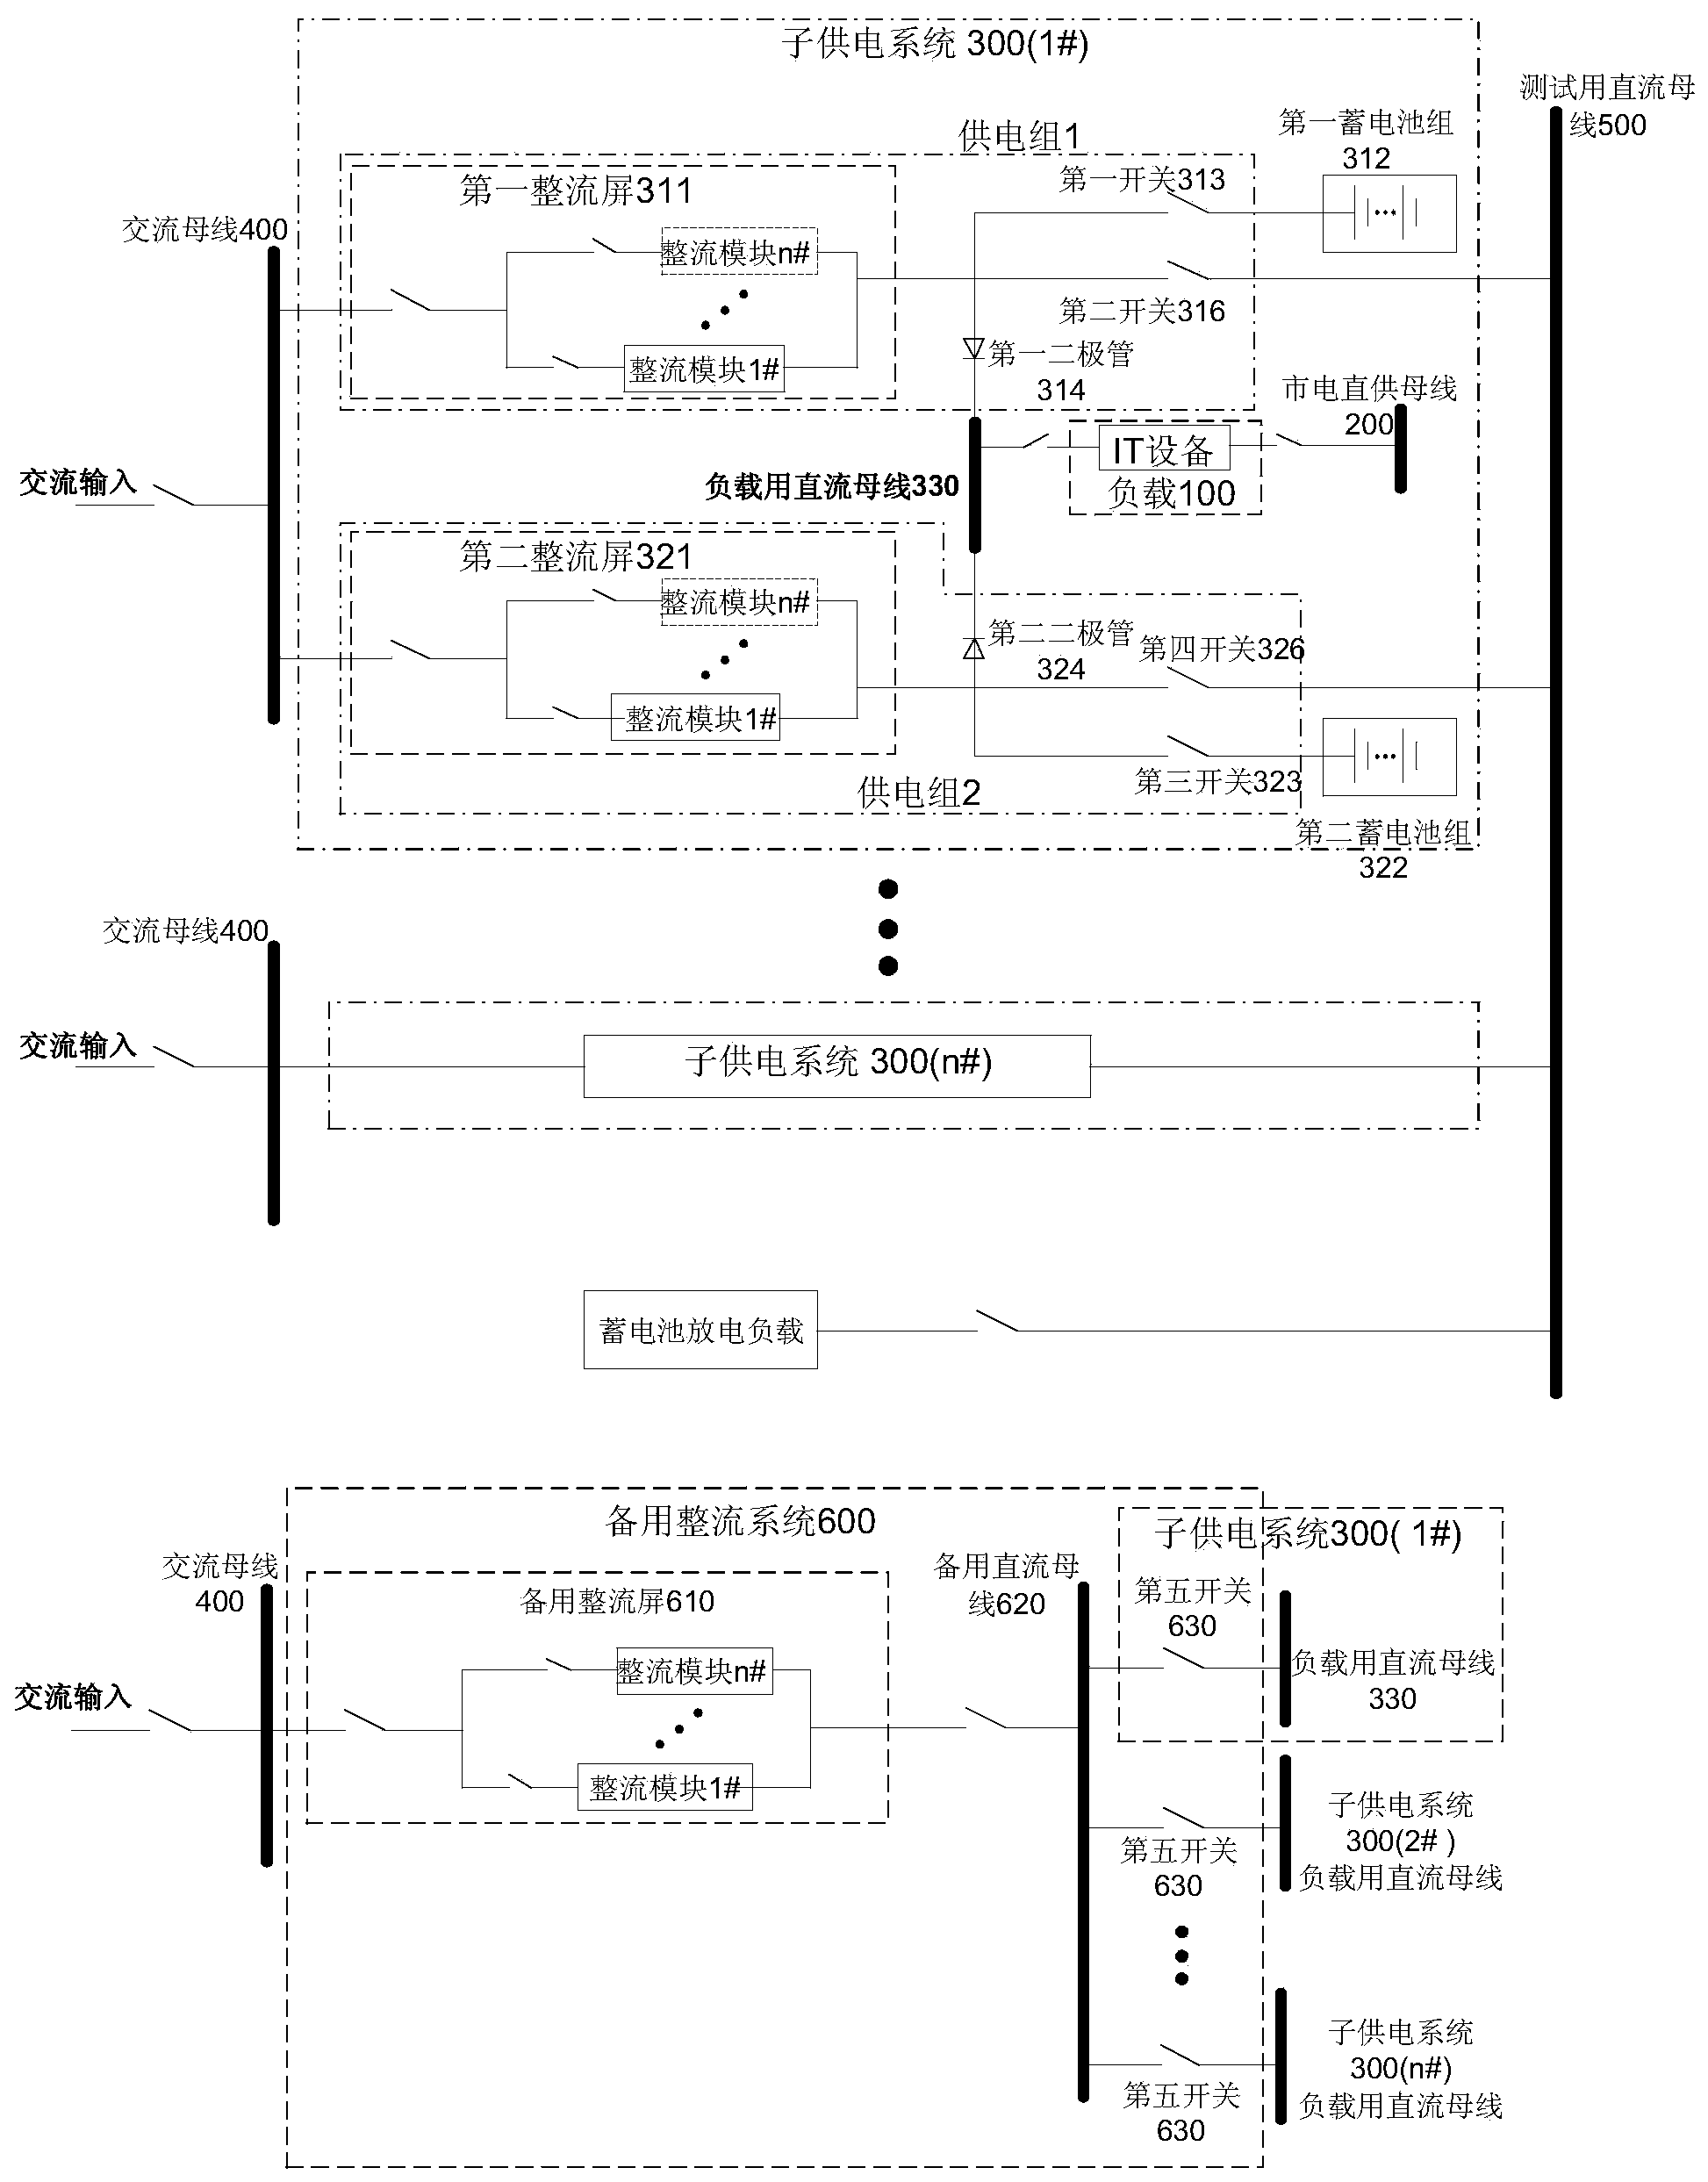 High-voltage direct-current power supply system